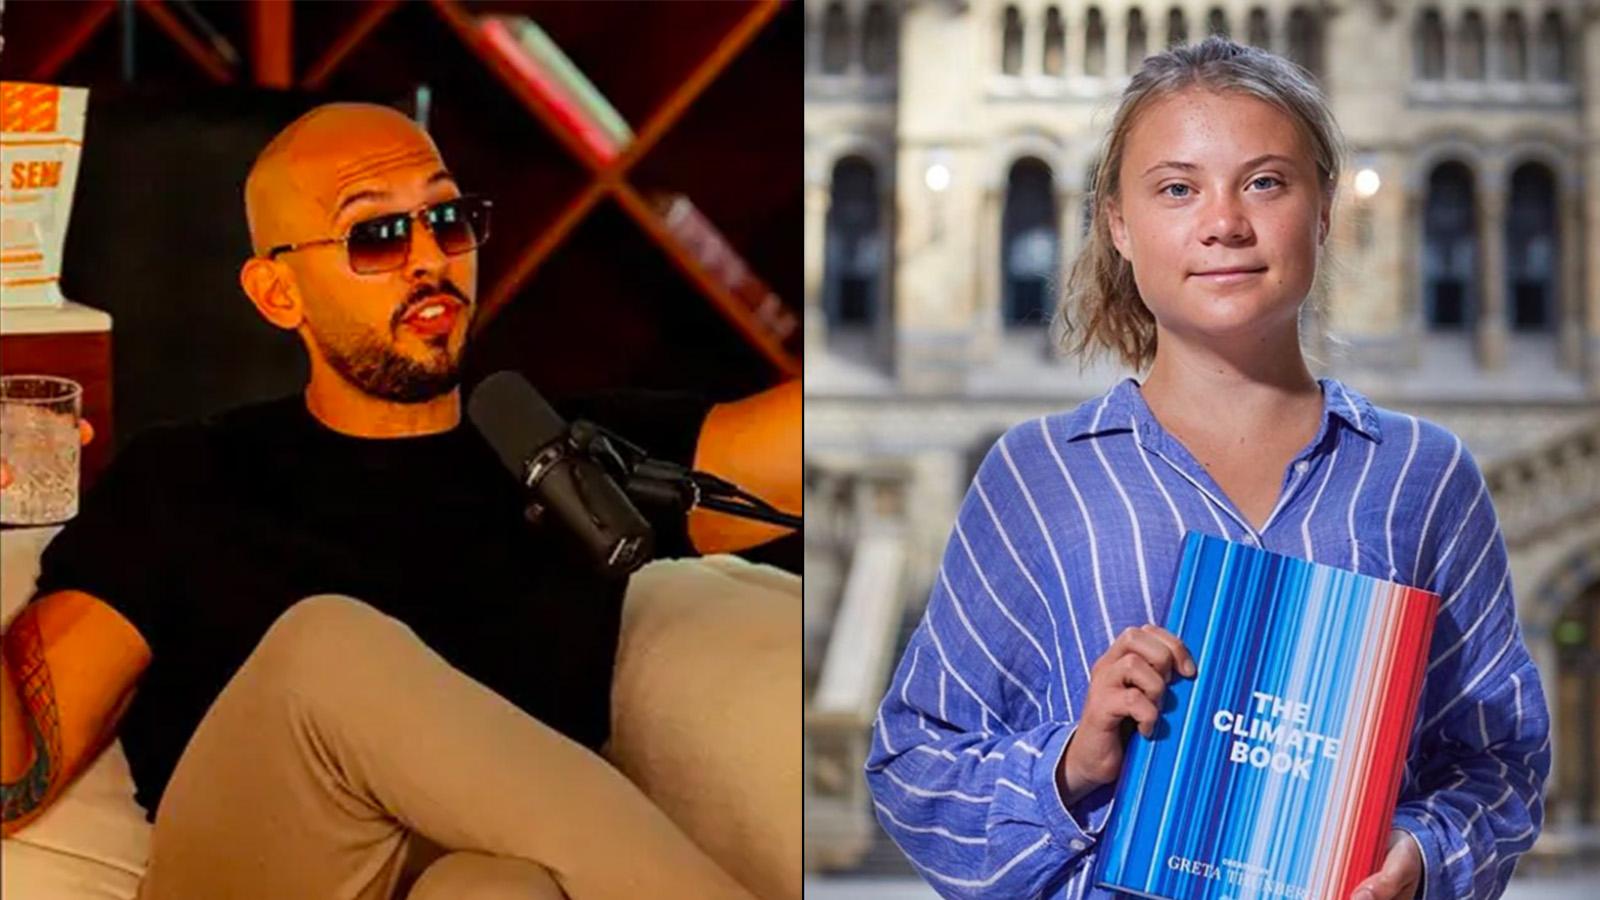 Andrew Tate on podcast next to Greta Thunberg with book